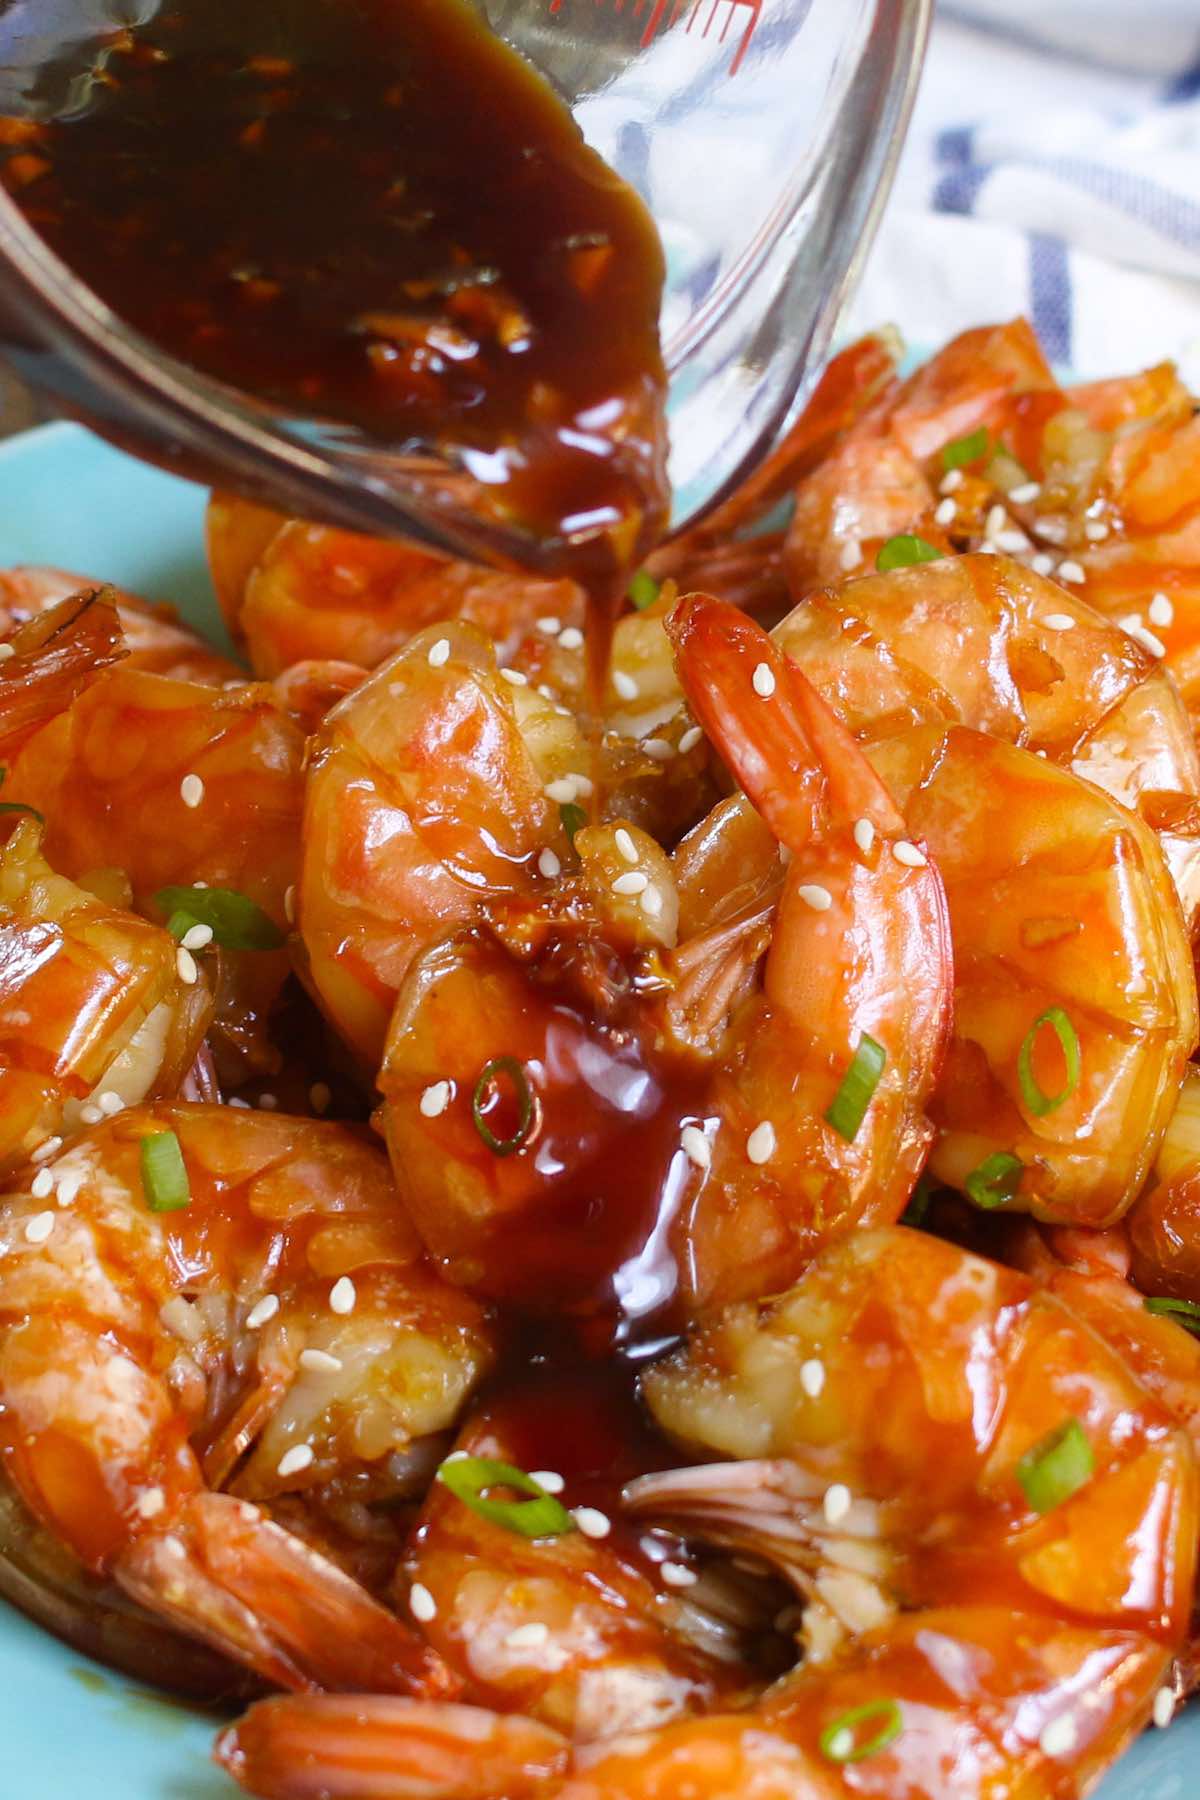 Drizzling honey garlic sauce onto this delicious Instant Pot shrimp recipe to create the signature sticky and sweet flavor that coats the shrimp